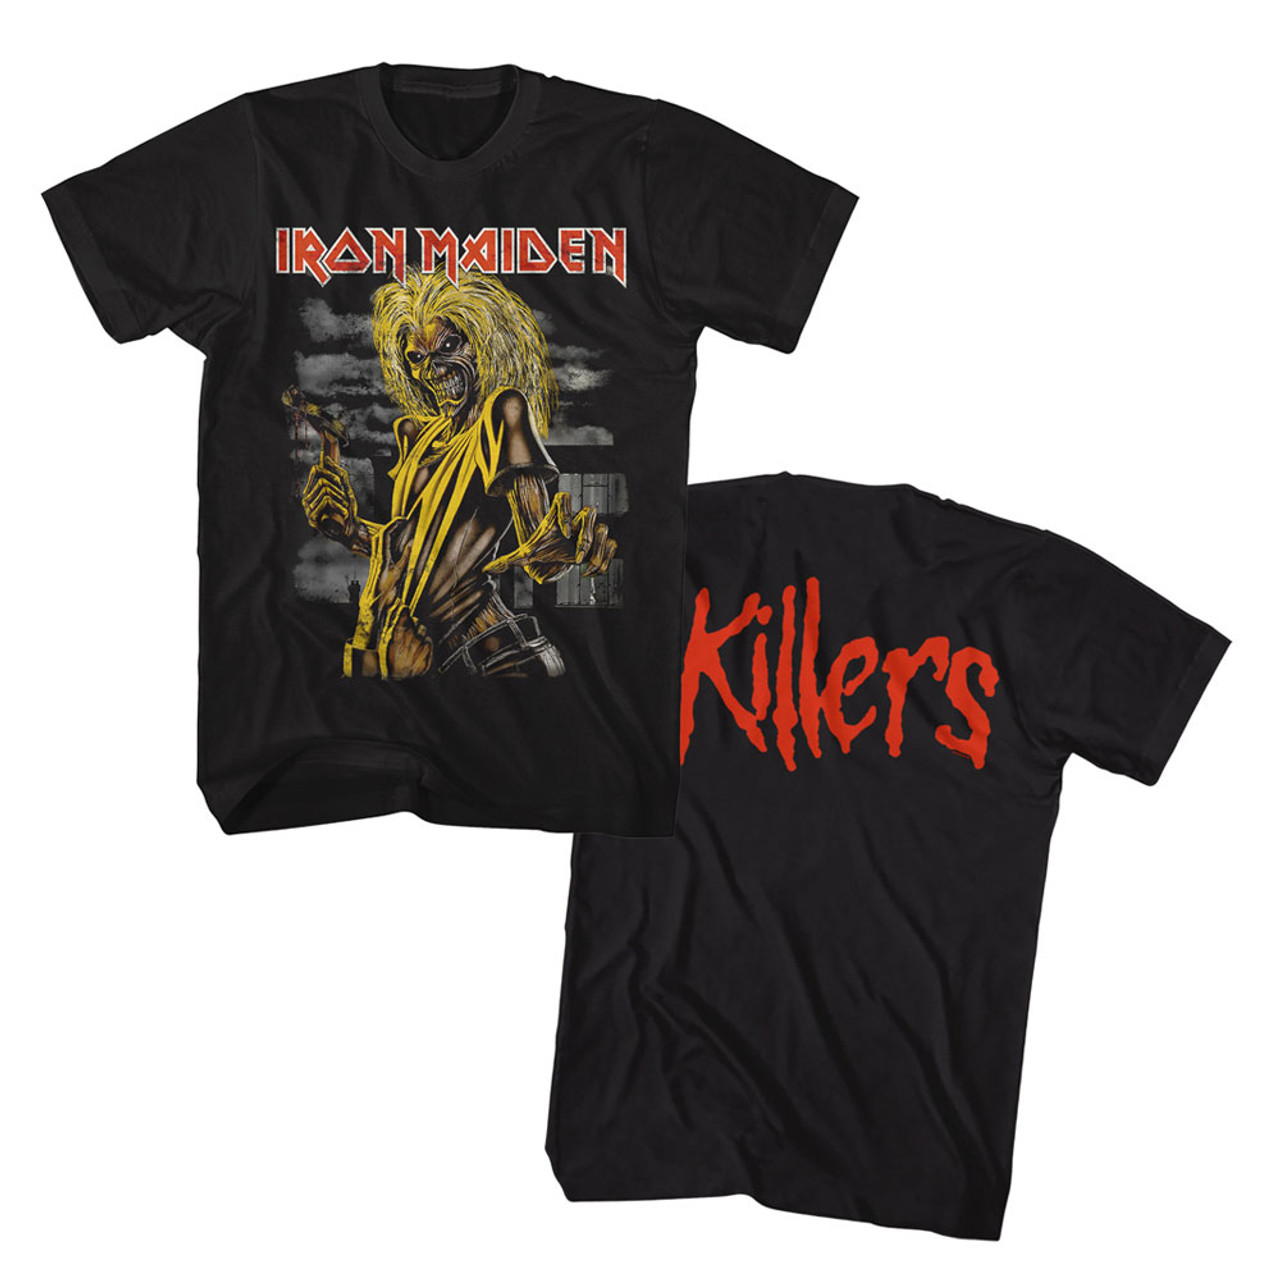 Iron Maiden Killers 2 sided black s/s mens tee